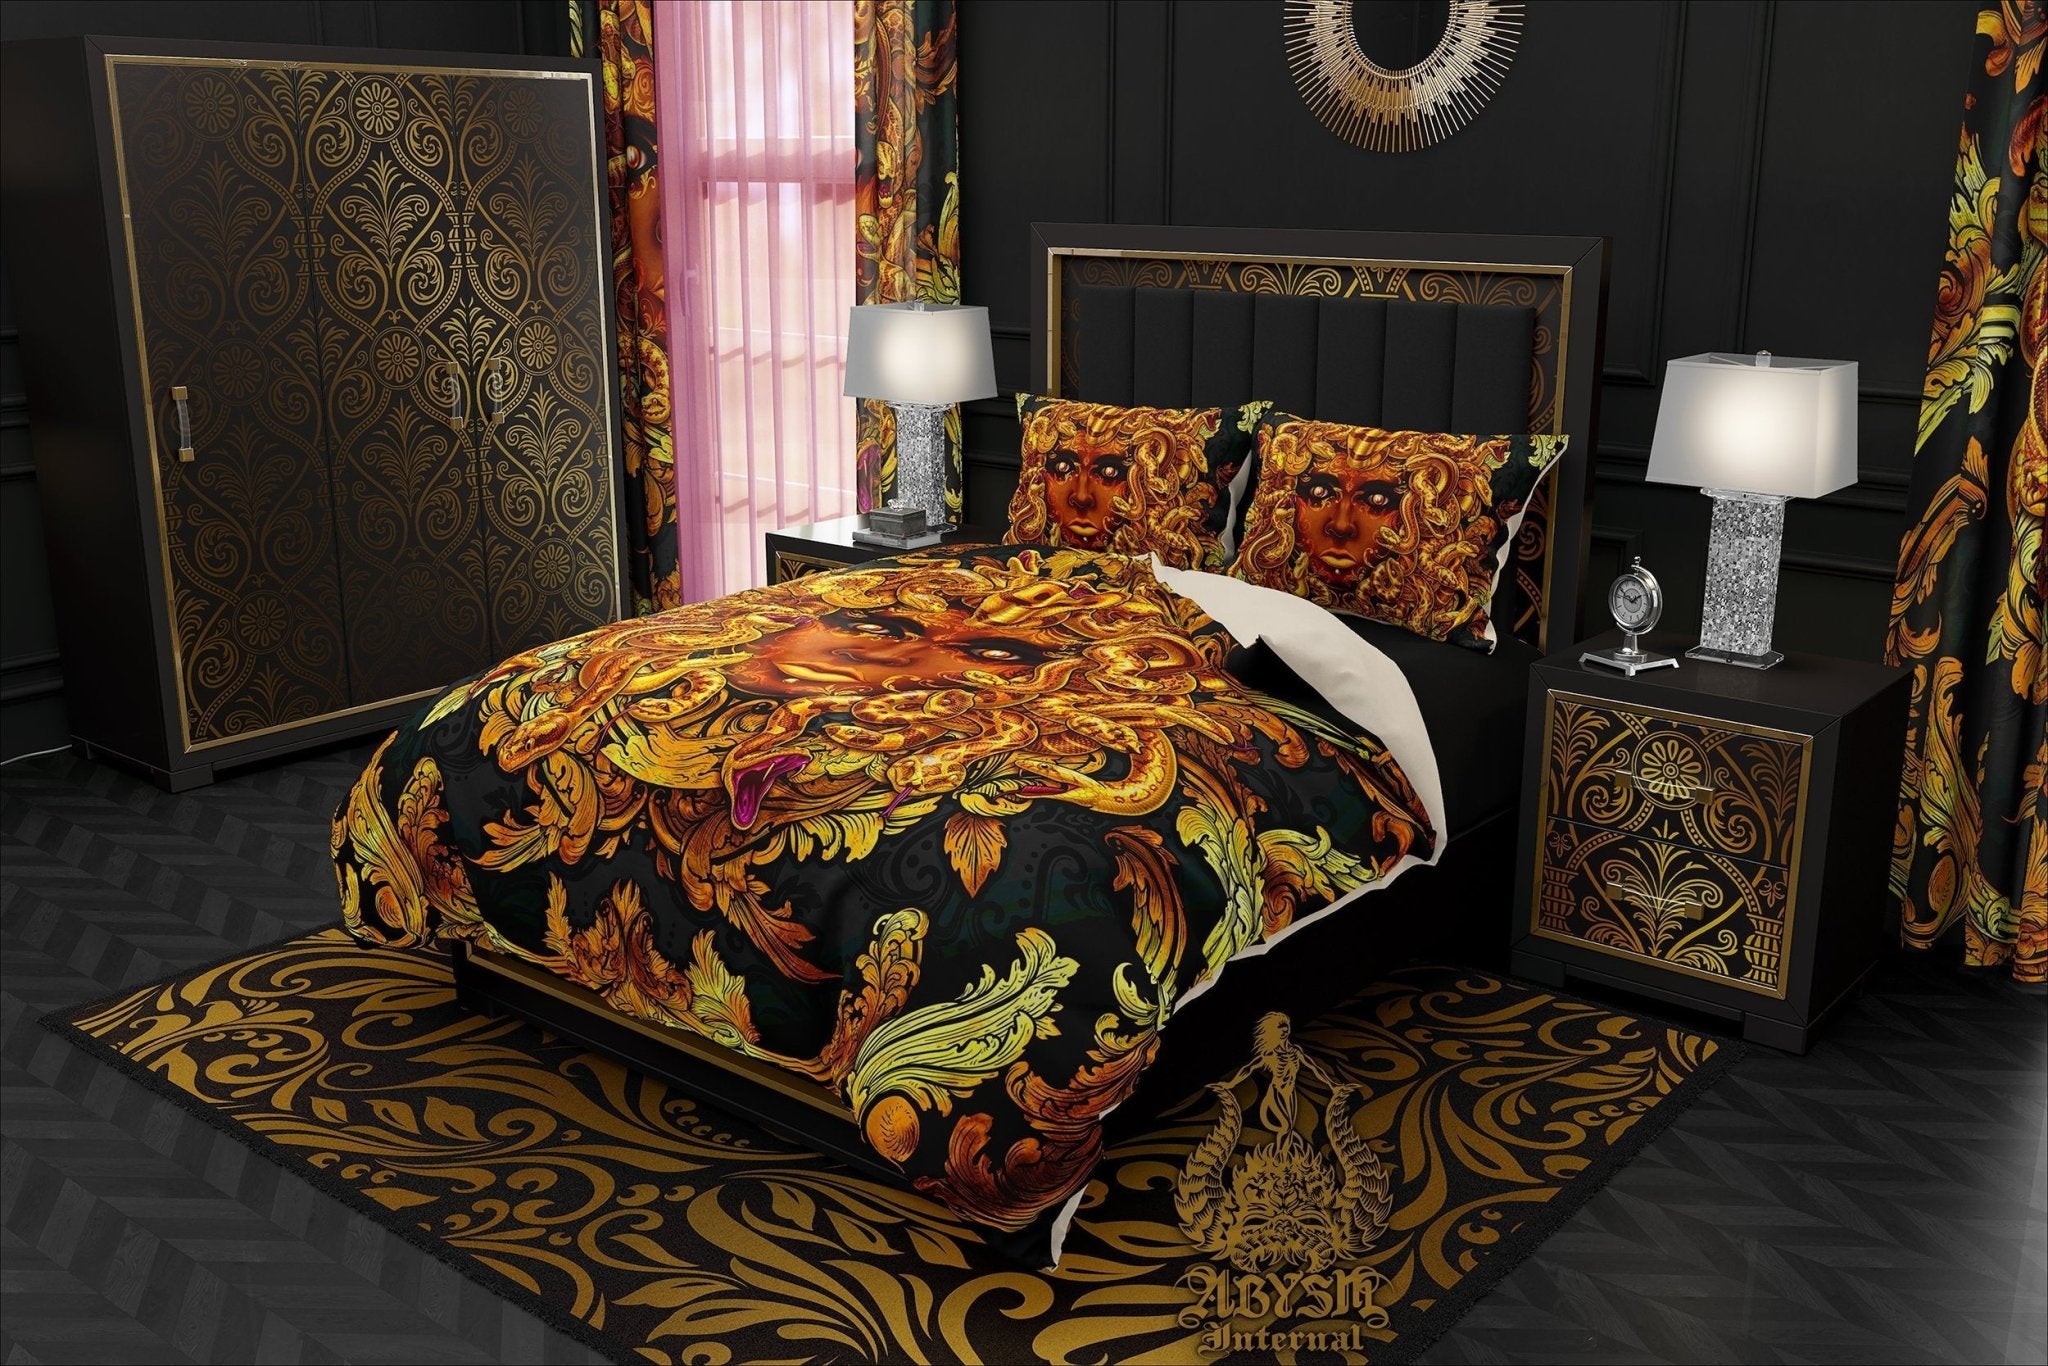 Medusa Bedding Set, Comforter and Duvet, Victorian Gothic Bed Cover and Bedroom Decor, King, Queen and Twin Size - Gold - Abysm Internal